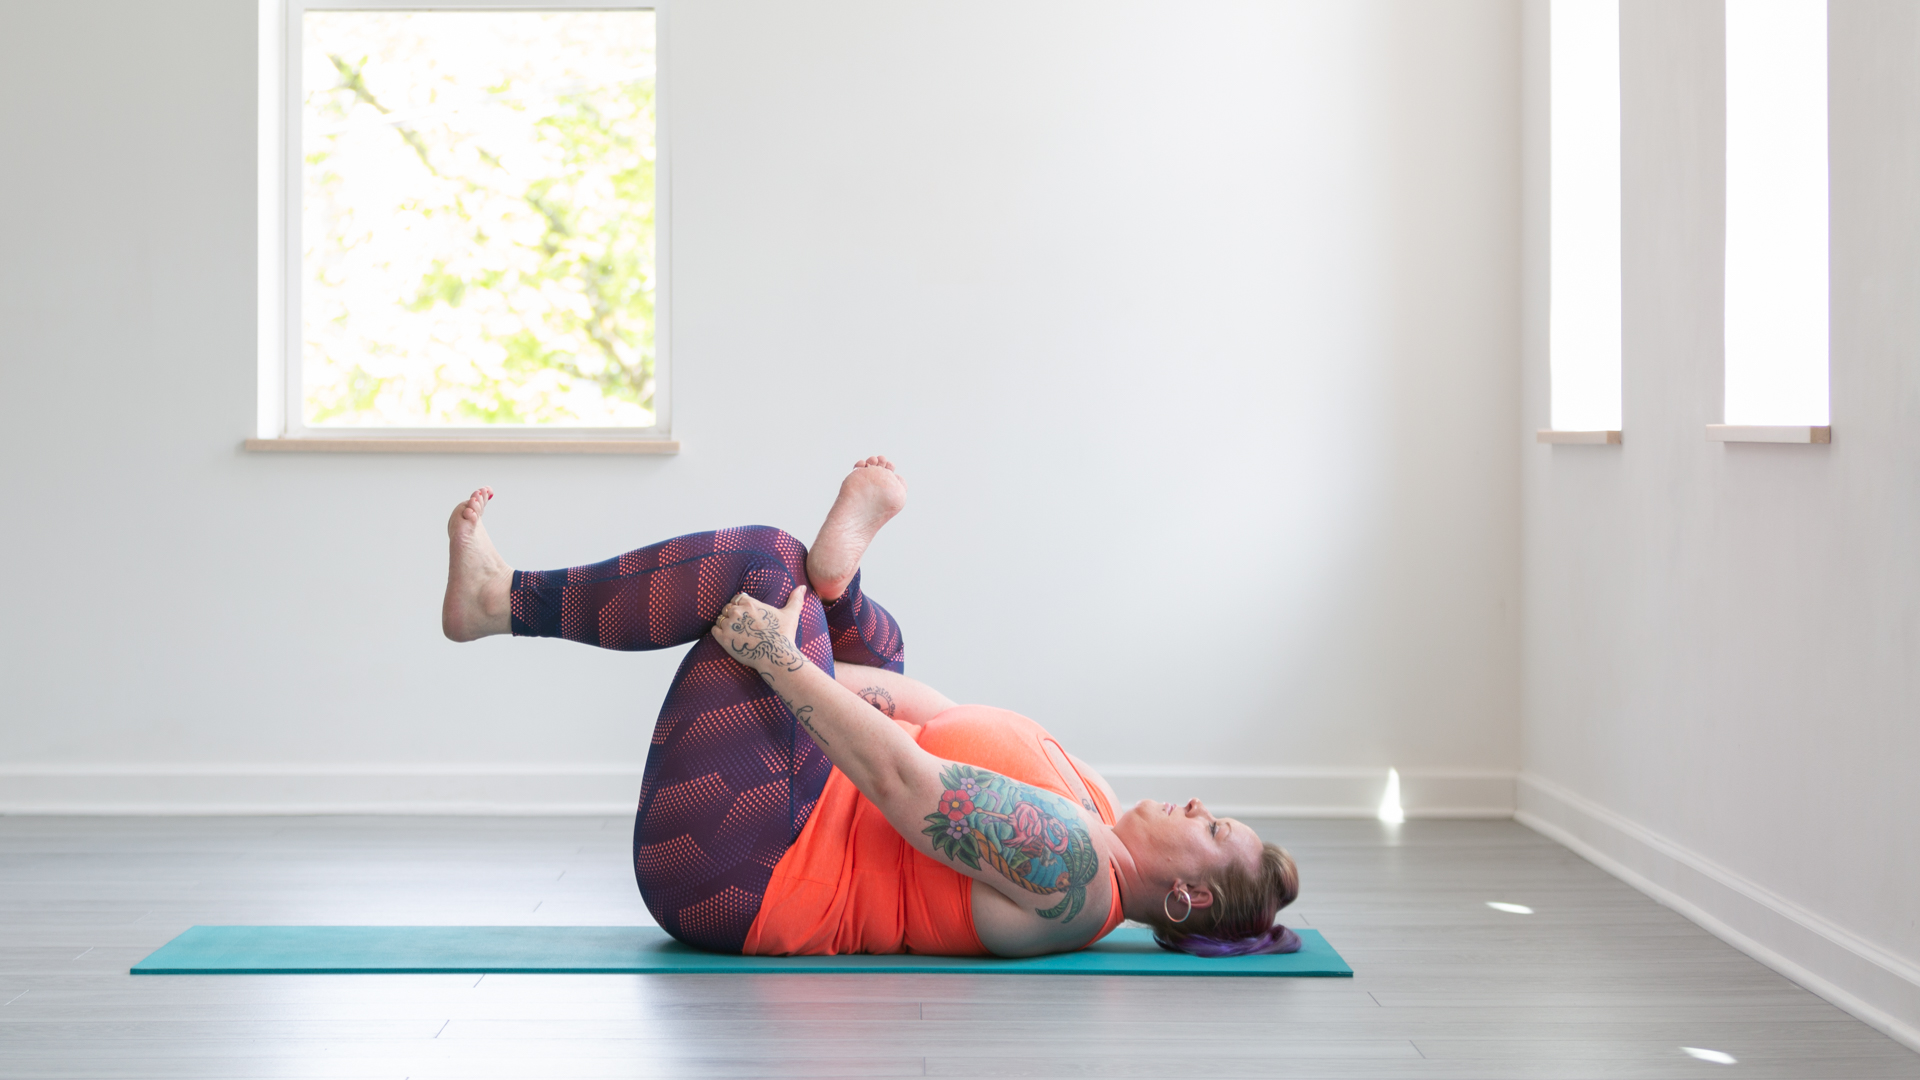 5 Yoga Exercises To Realign The Spine - Surrey Yoga Therapy - Vicky Arundel